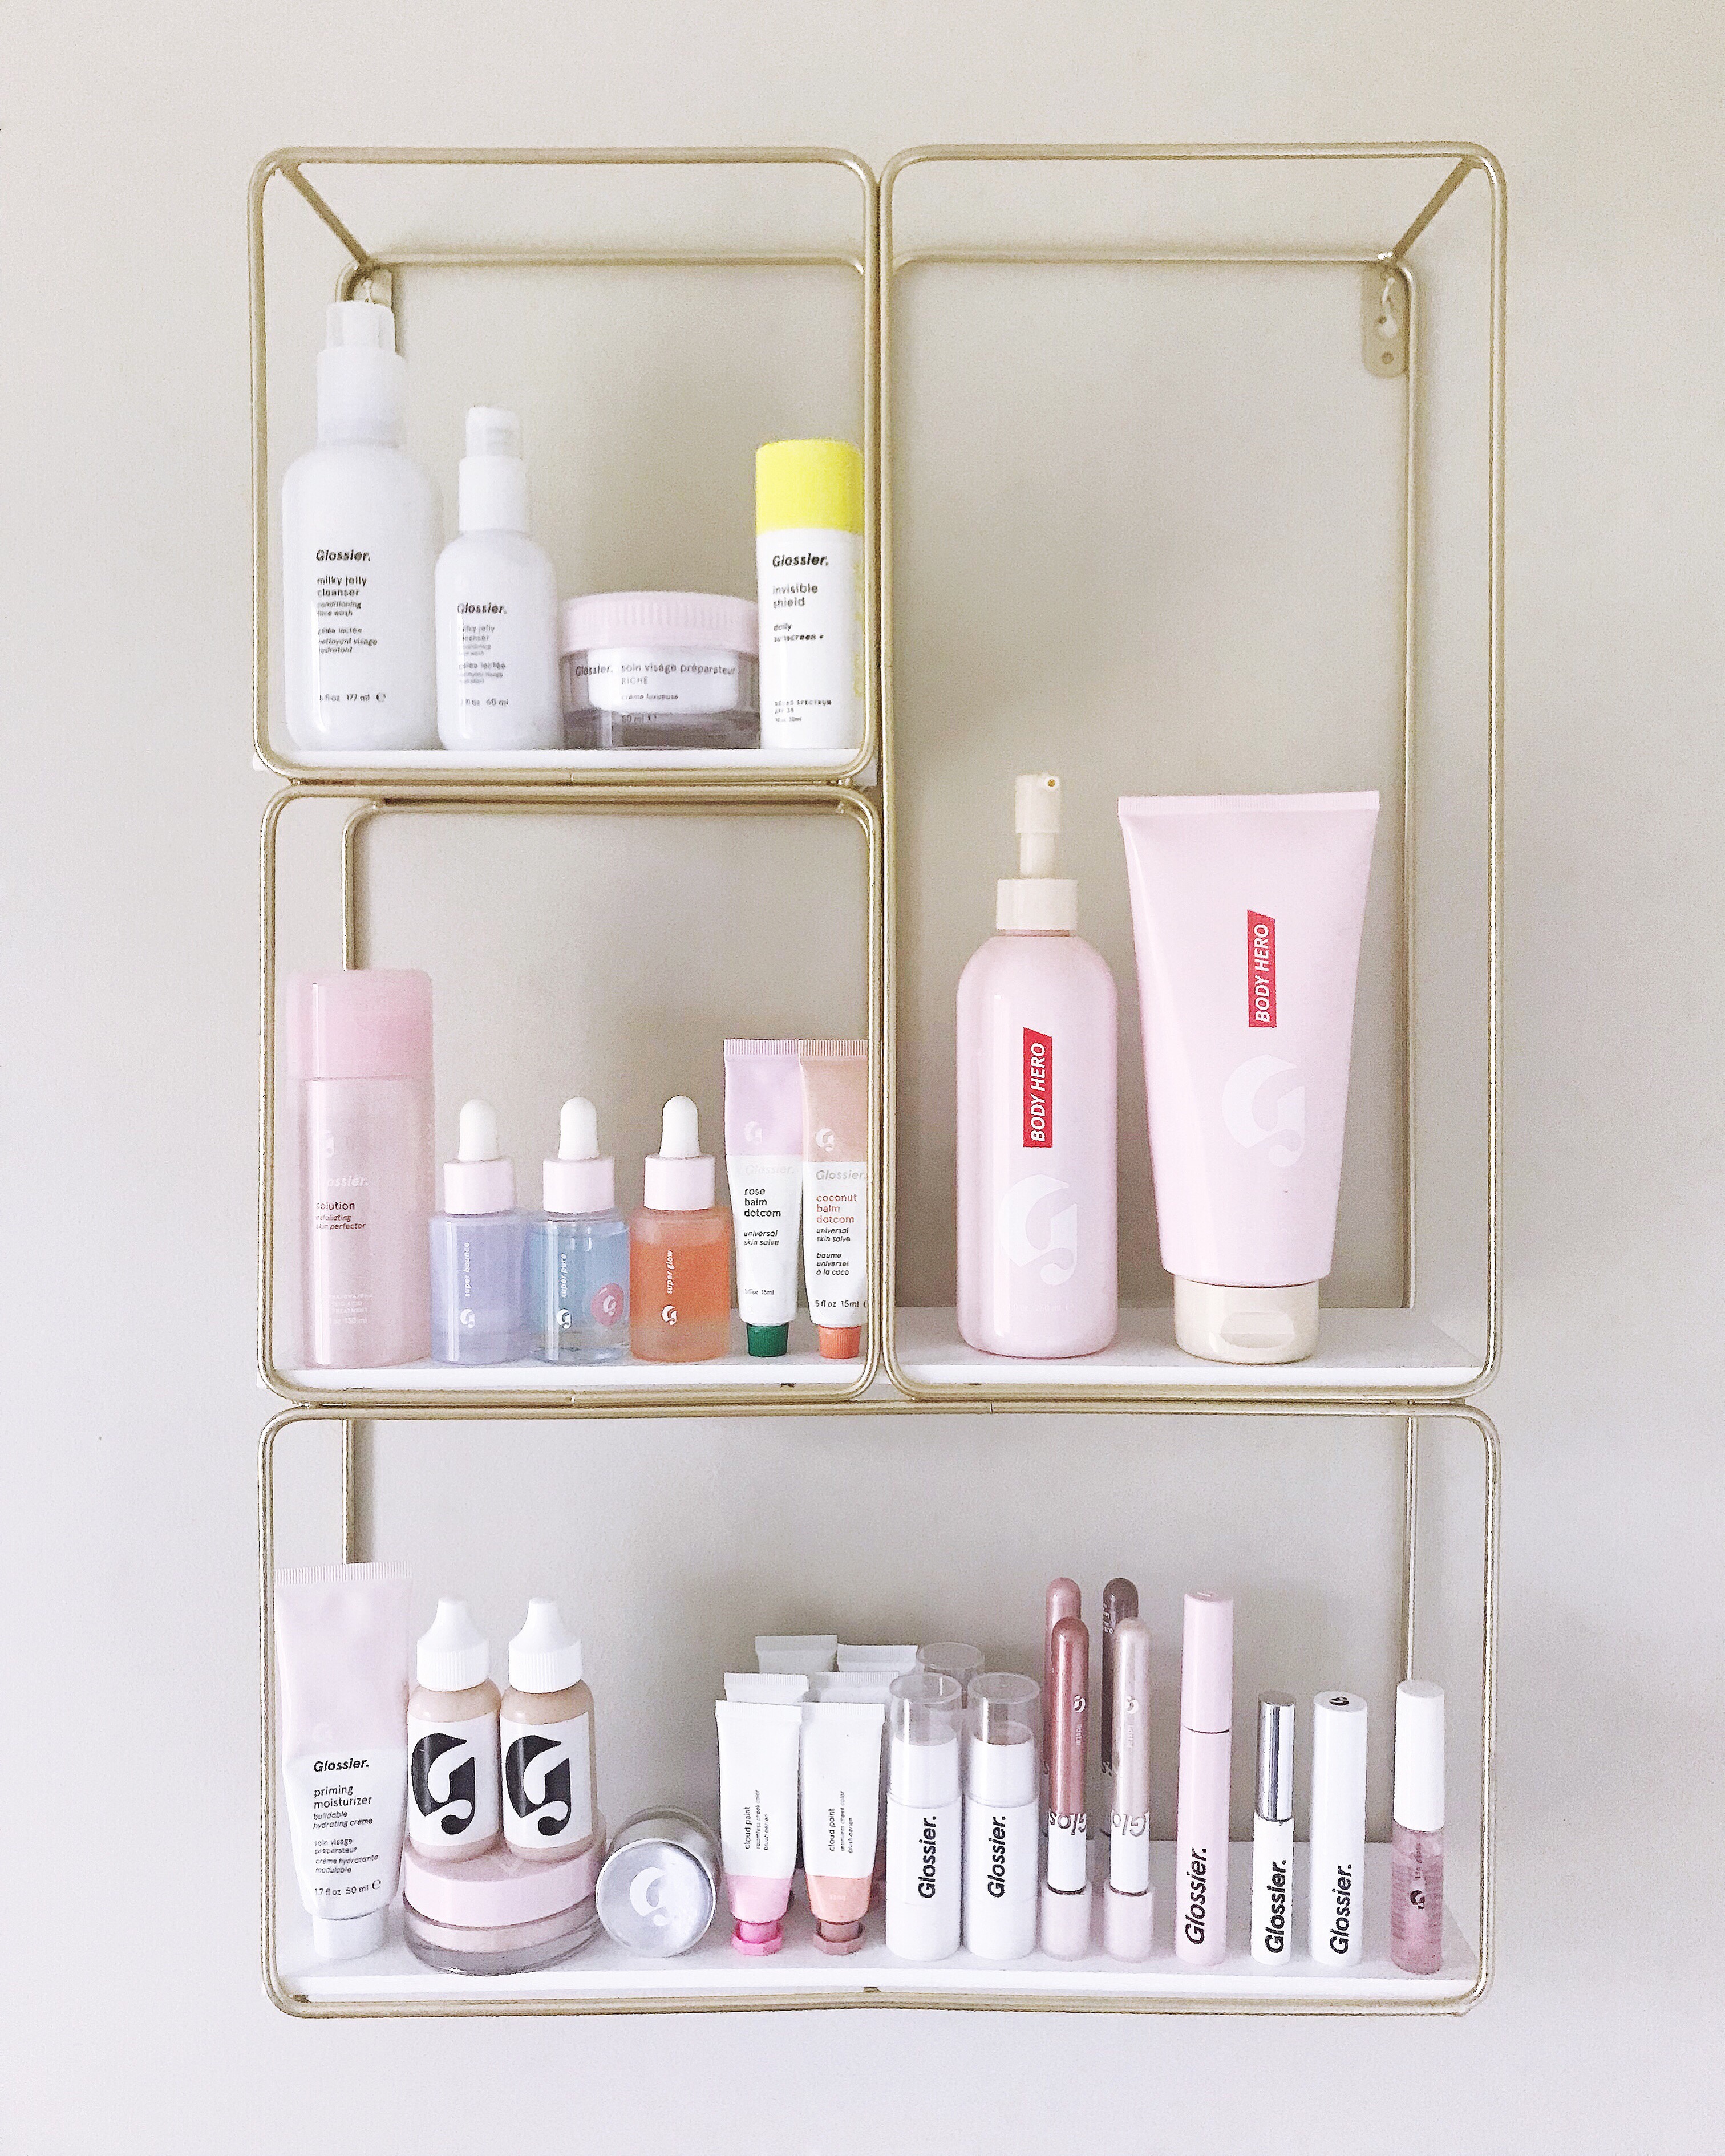 Re-Stock your Makeup and Skincare - The Minimalist